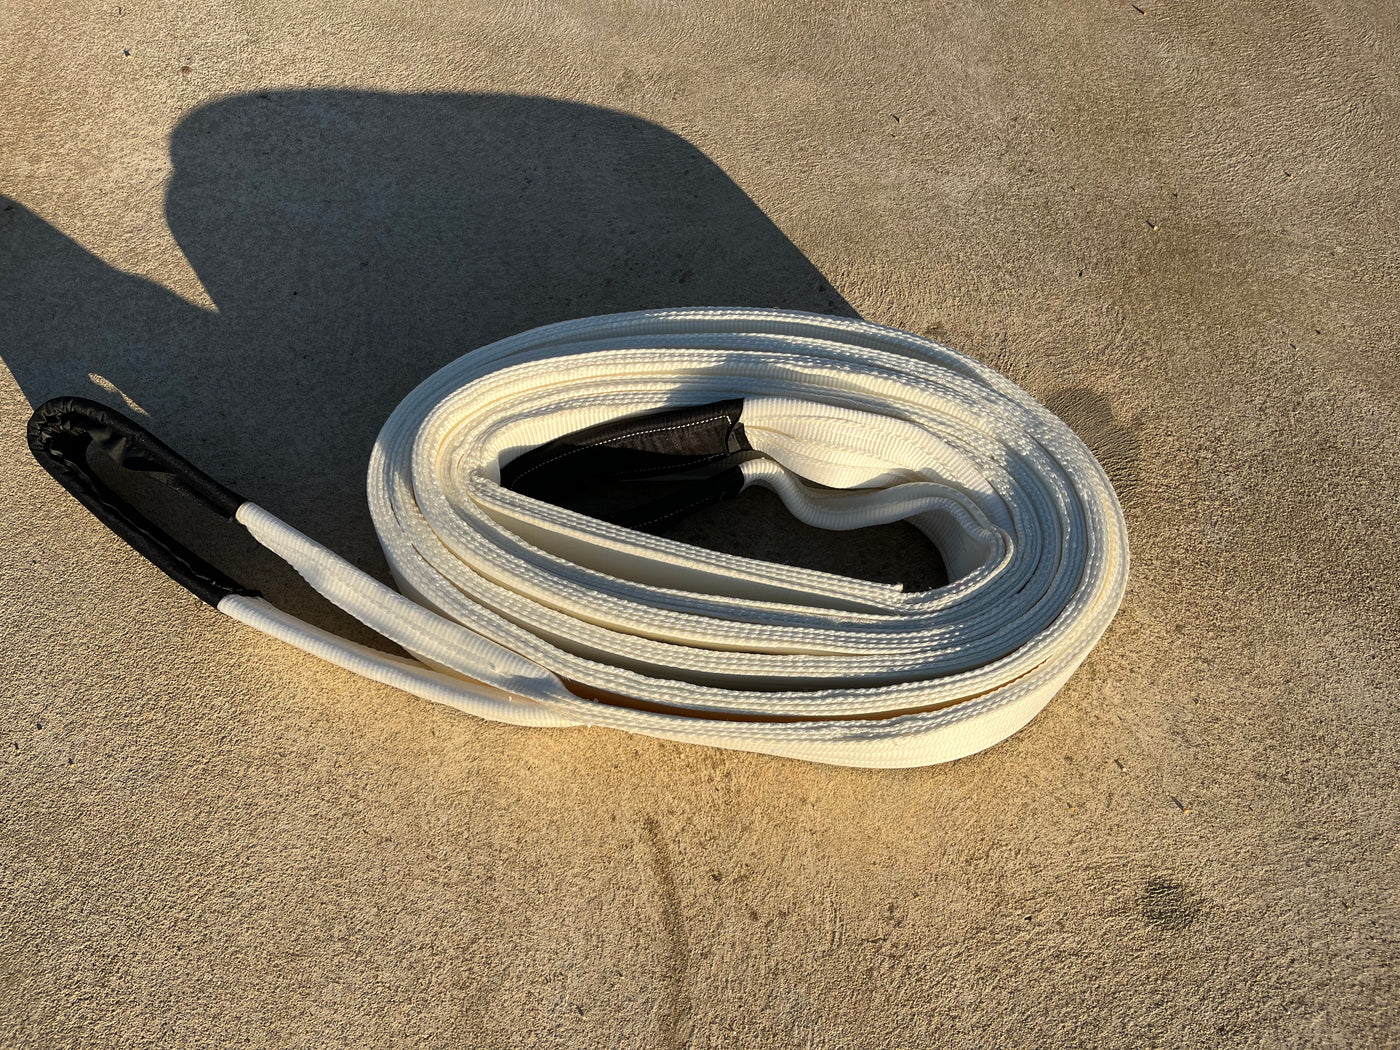 100,000kg / 100 Tonne Snatch Strap: 9m Length for Heavy-Duty Towing | Reliable Towing Equipment